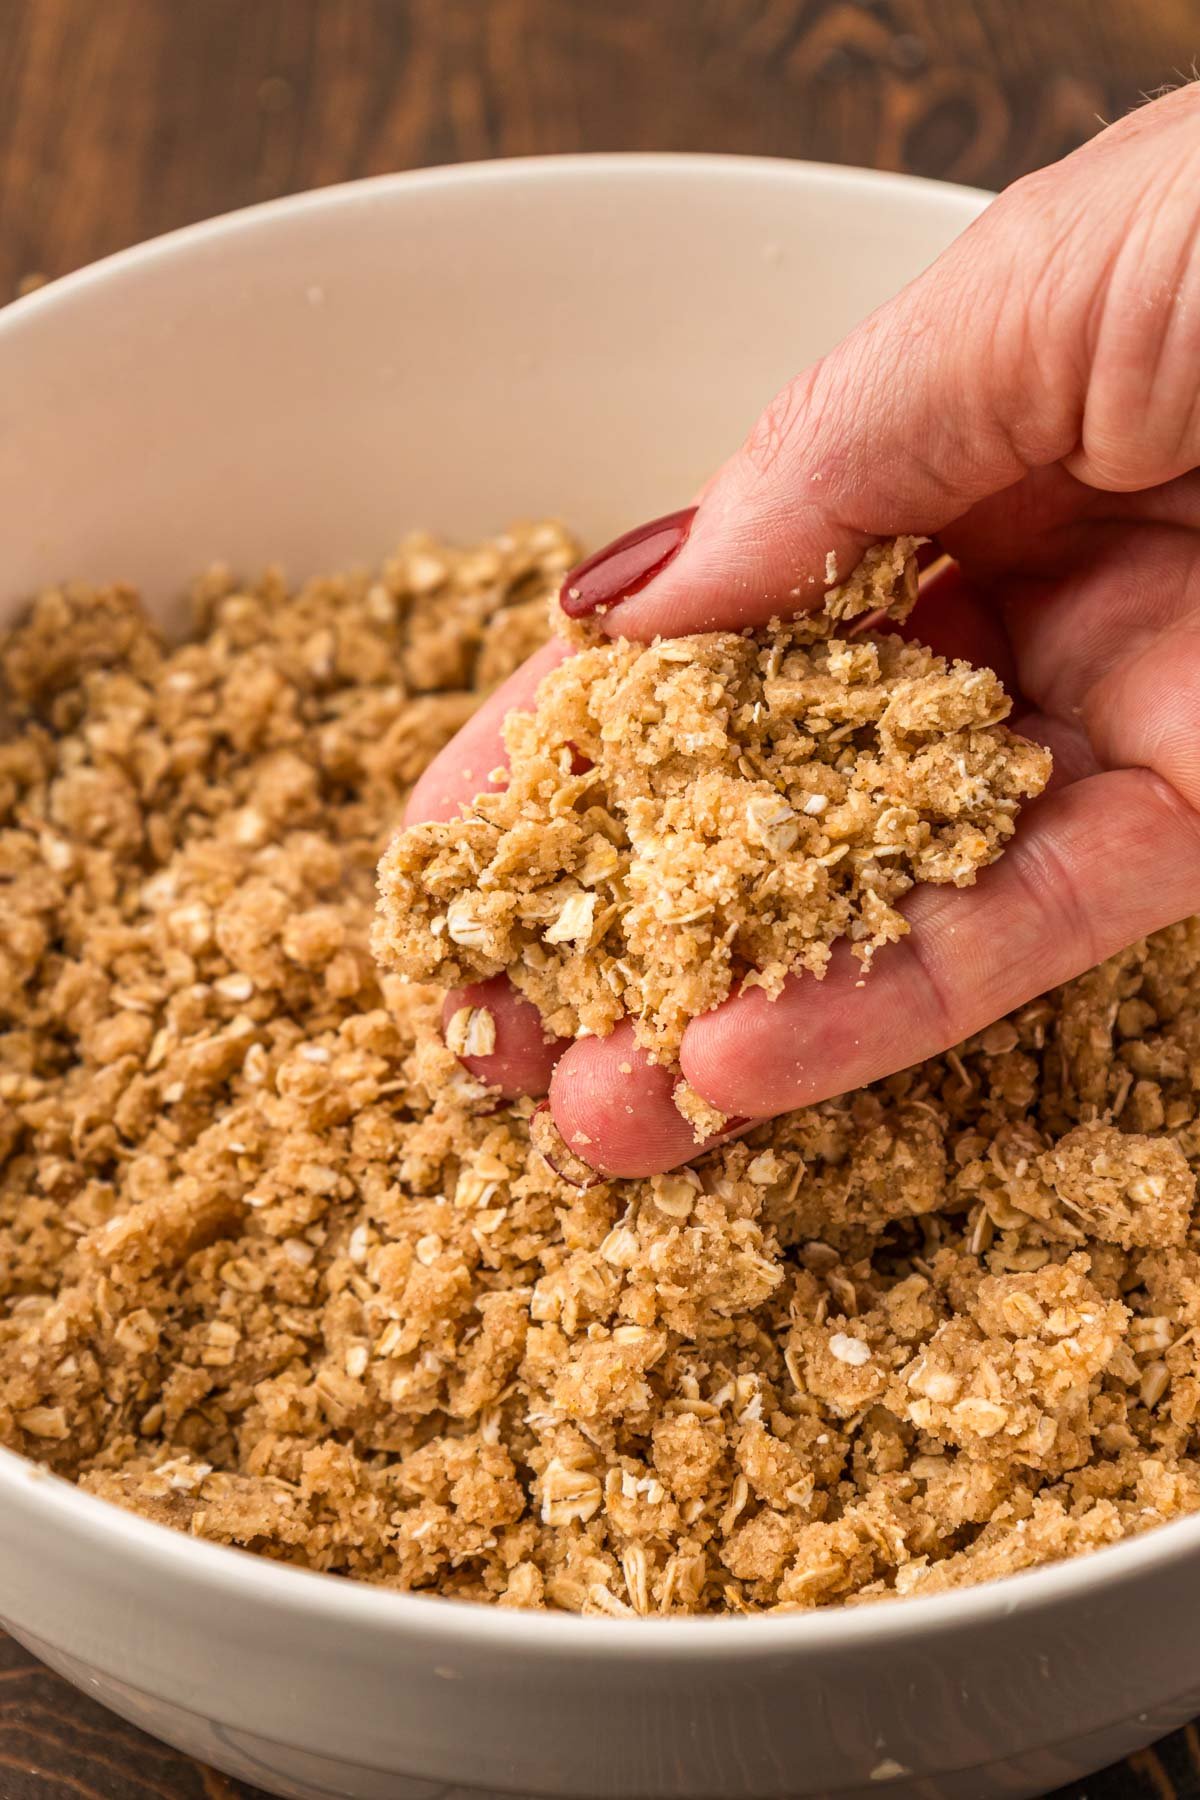 Crumble topping for apple crisp in a bowl with a woman's hand lifting some out.